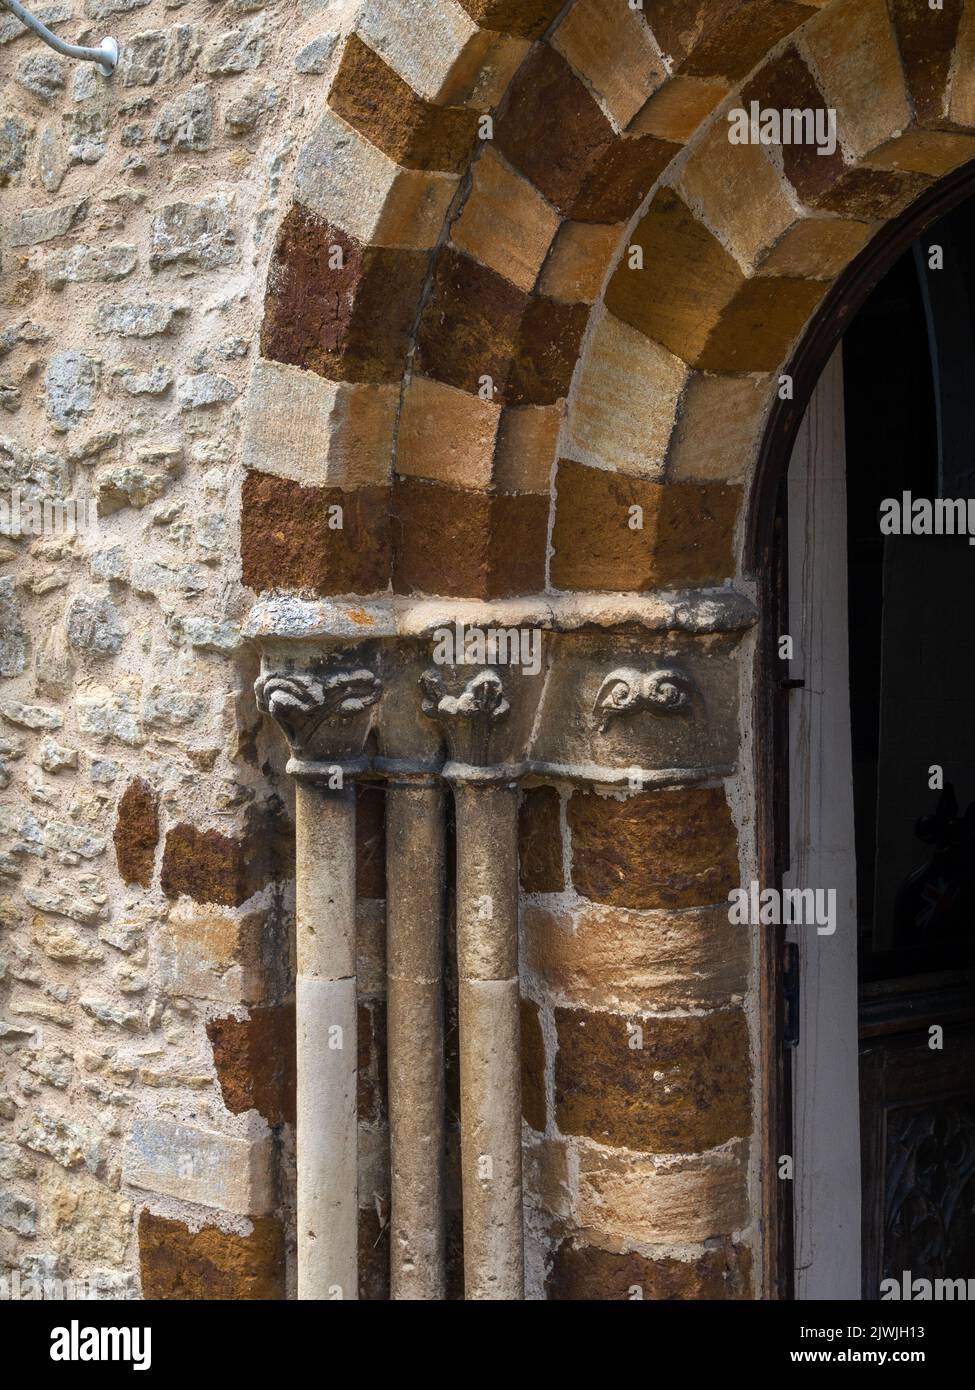 Architectural detail from the doorway of the Medieval church of St Michaels and All Angels in the village of Farndish, Bedfordshire, UK; Stock Photo